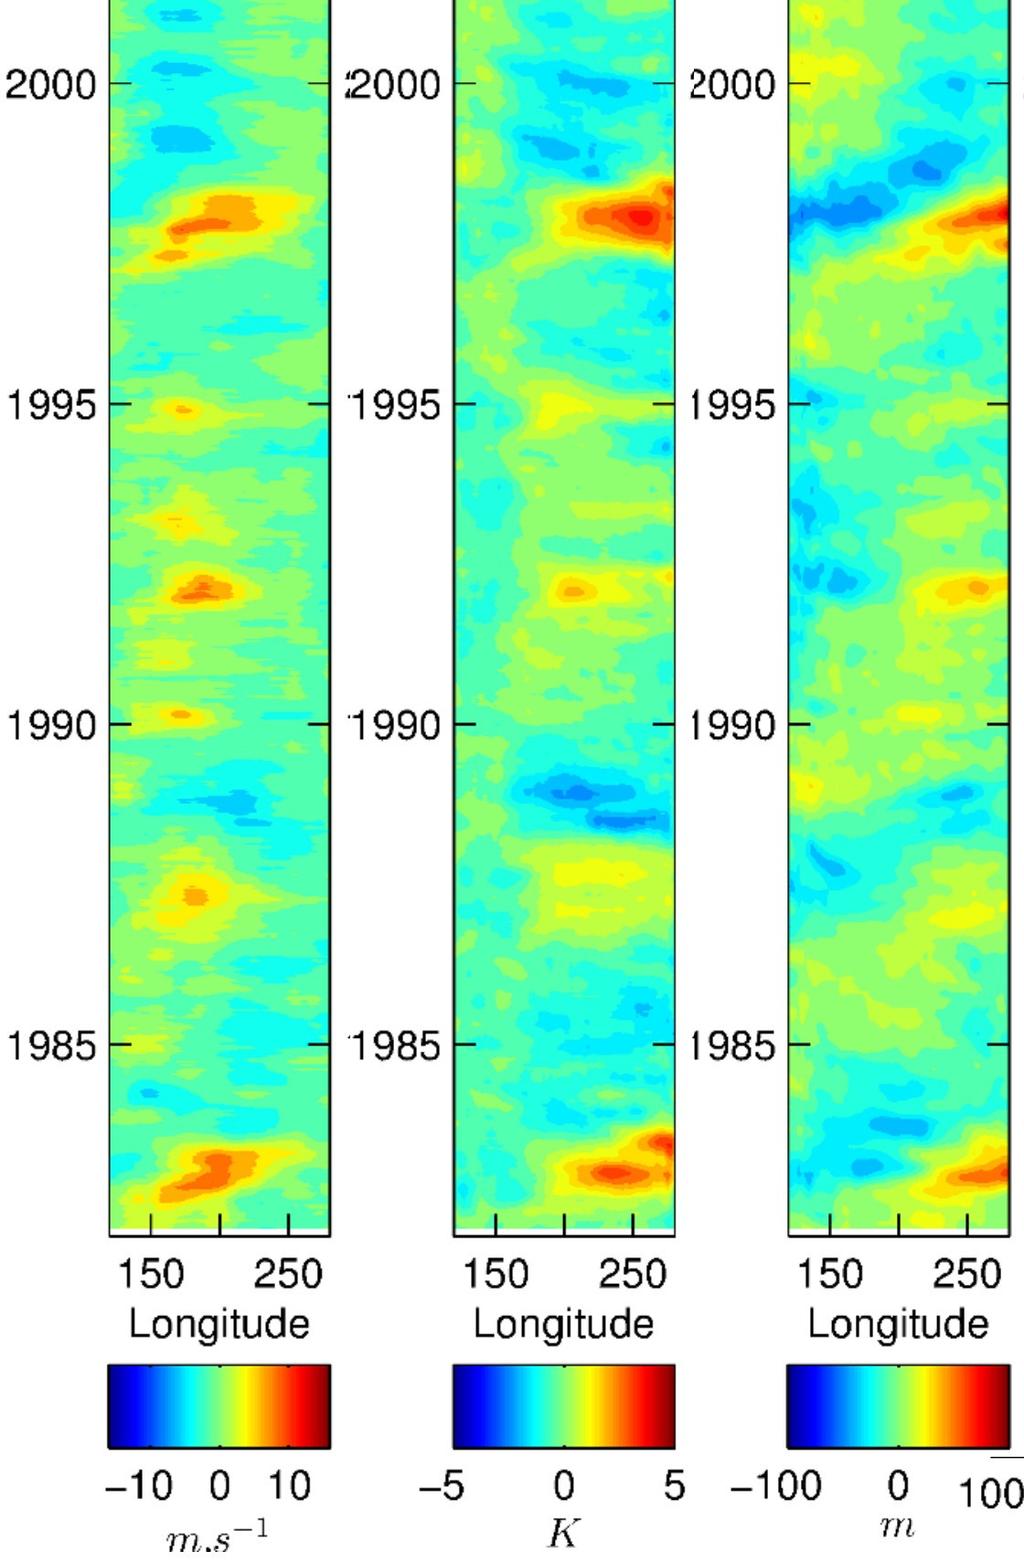 The El Nino Southern-Oscillation Introduction Zonal winds u Thermocline SST T H Hovmollers of winds, SST and thermocline depth anomalies averaged at equator (5N-5S), as a function of longitude (deg